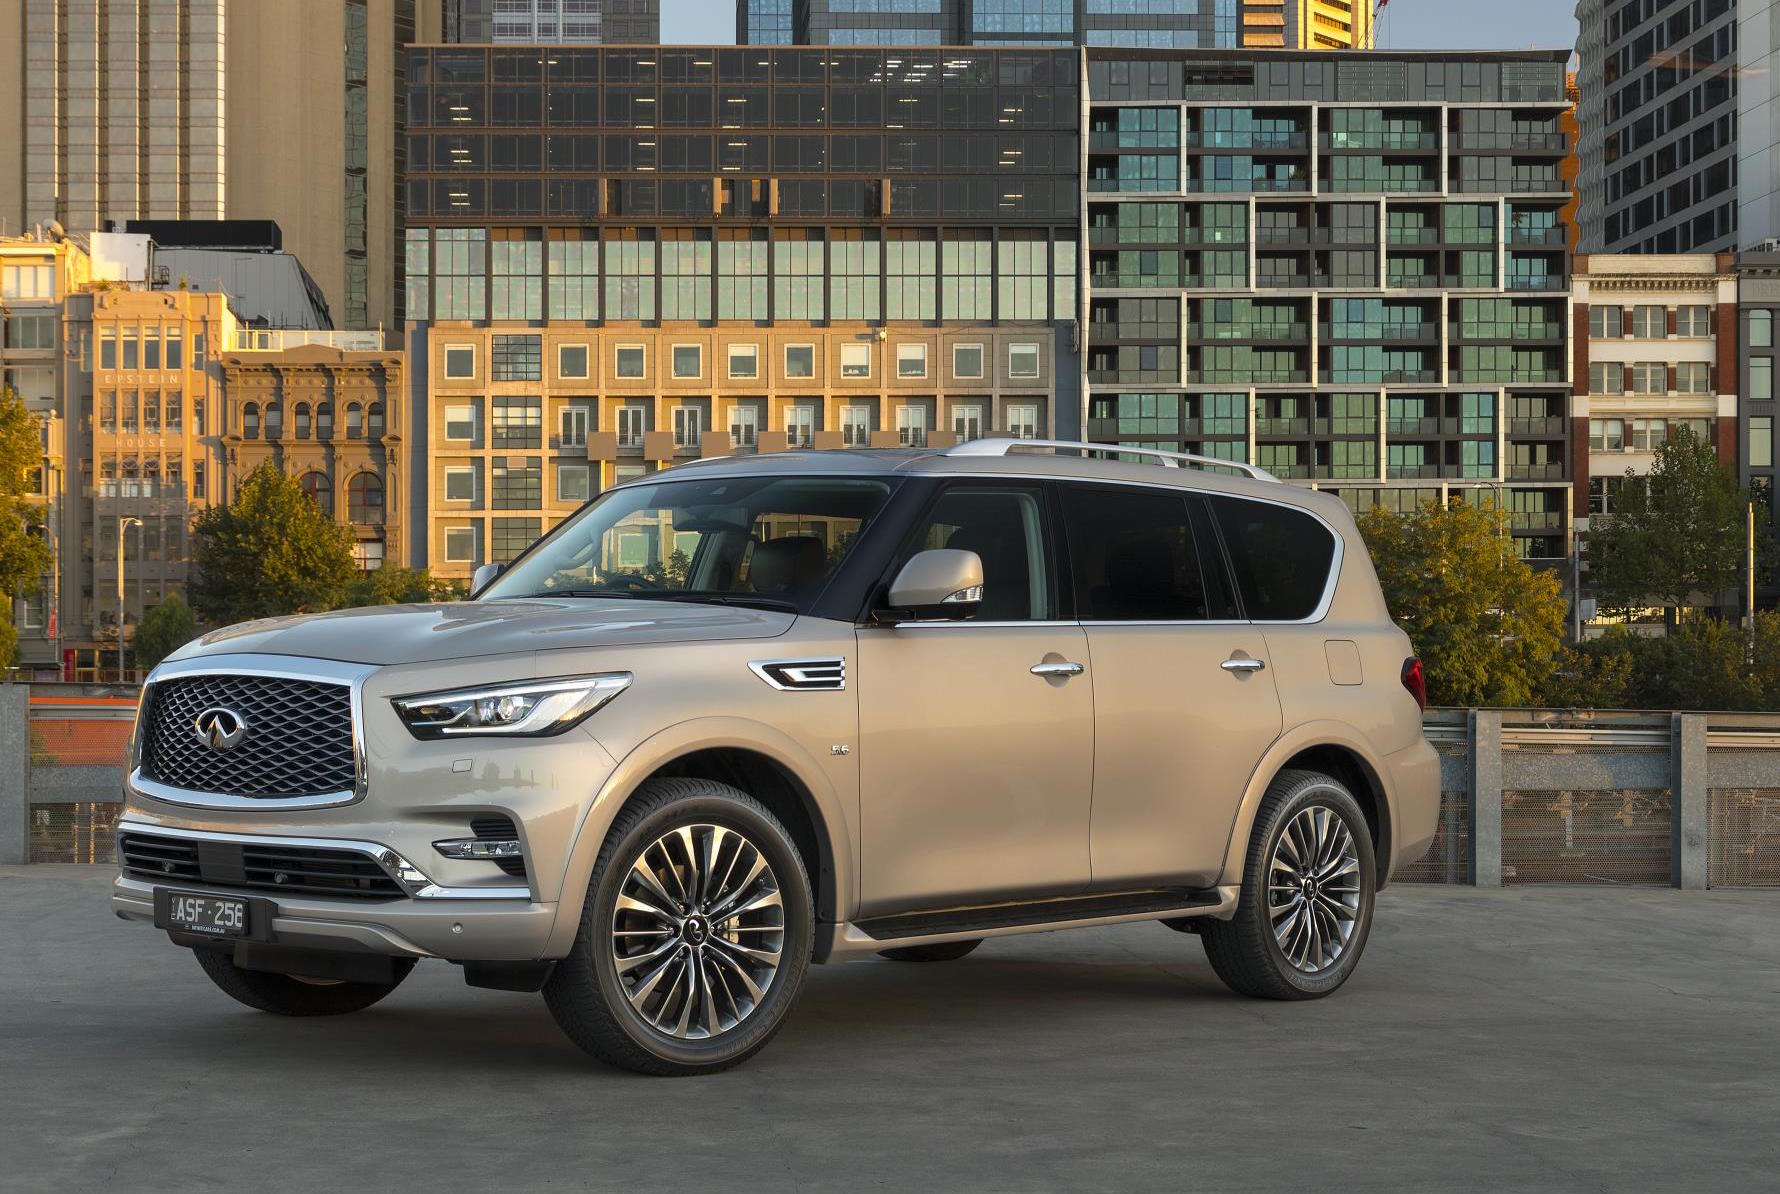 2018 Infiniti QX80 now on sale in Australia from $110,900